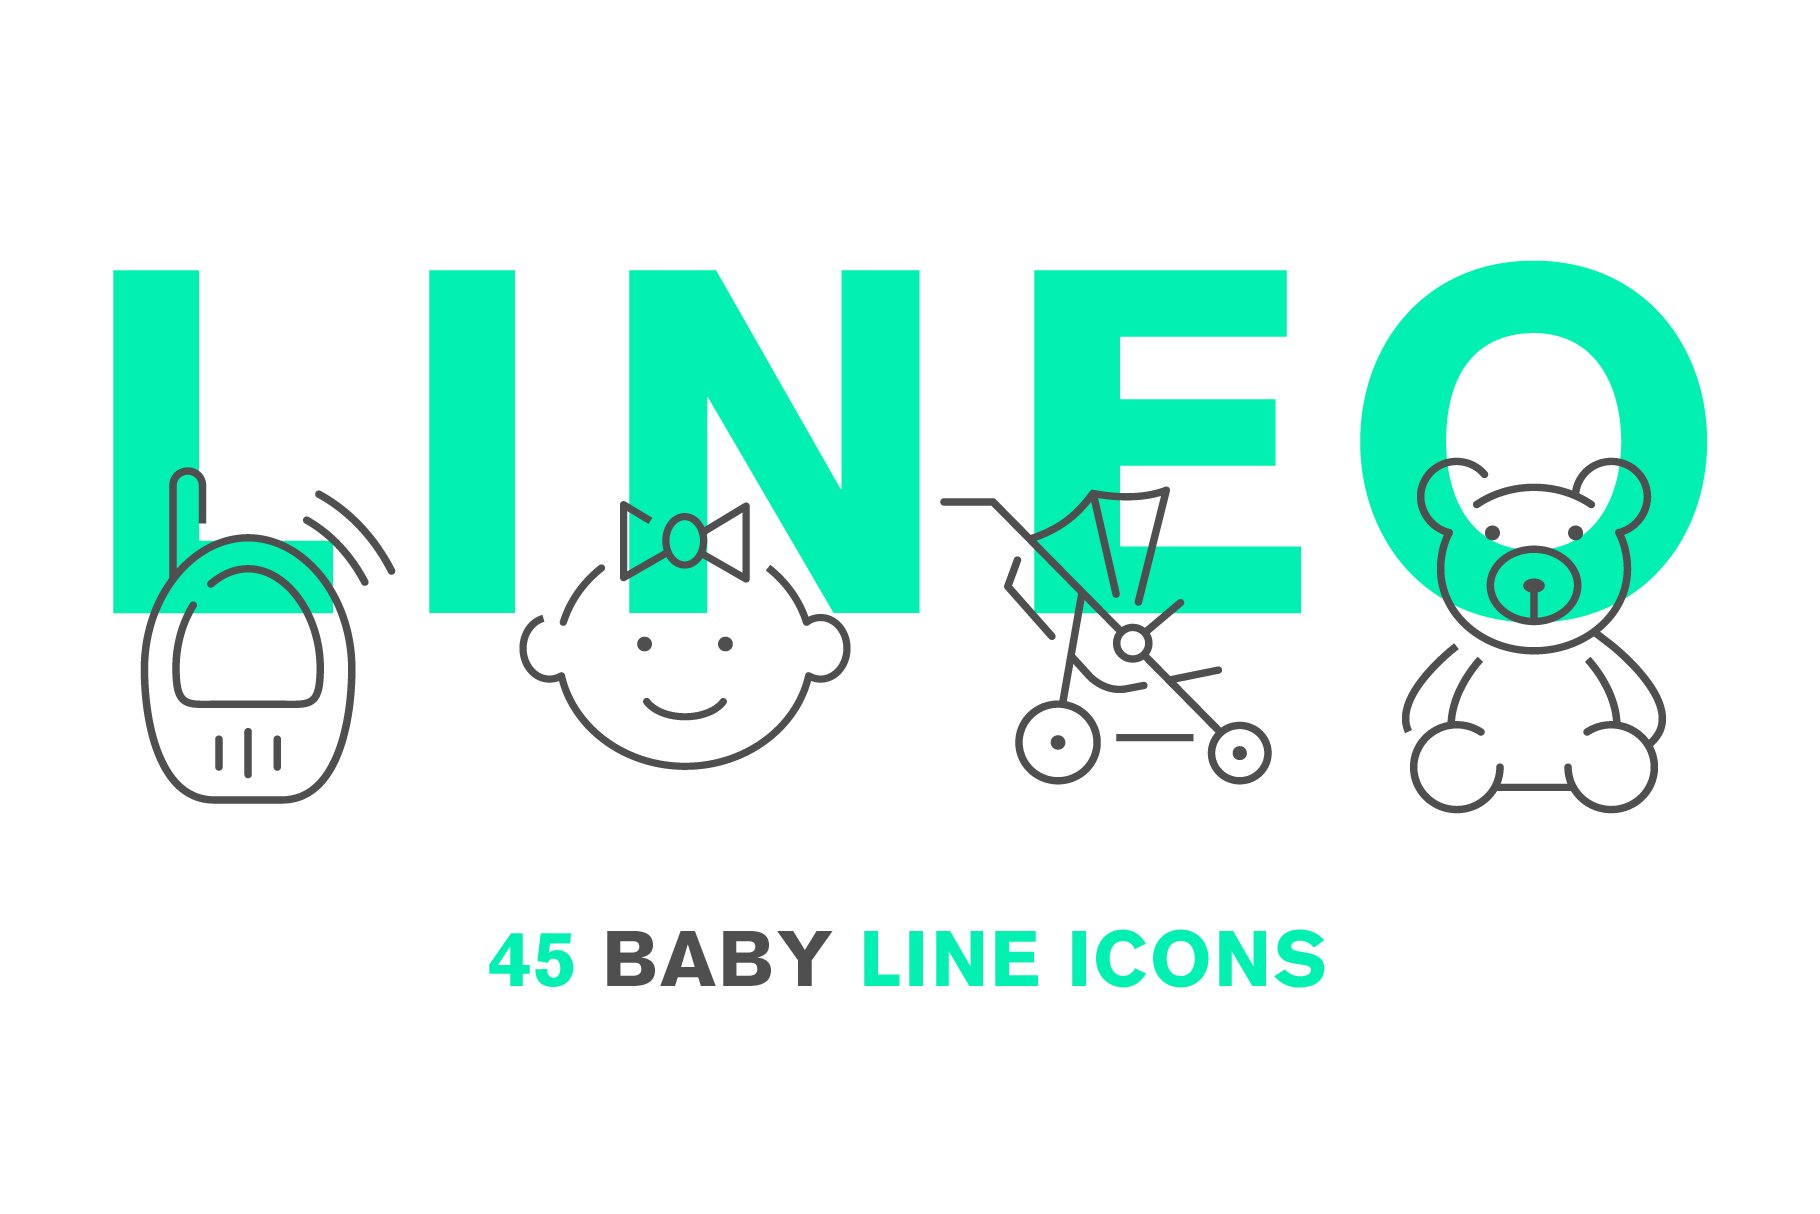 LINEO - 45 BABY ICONS cover image.